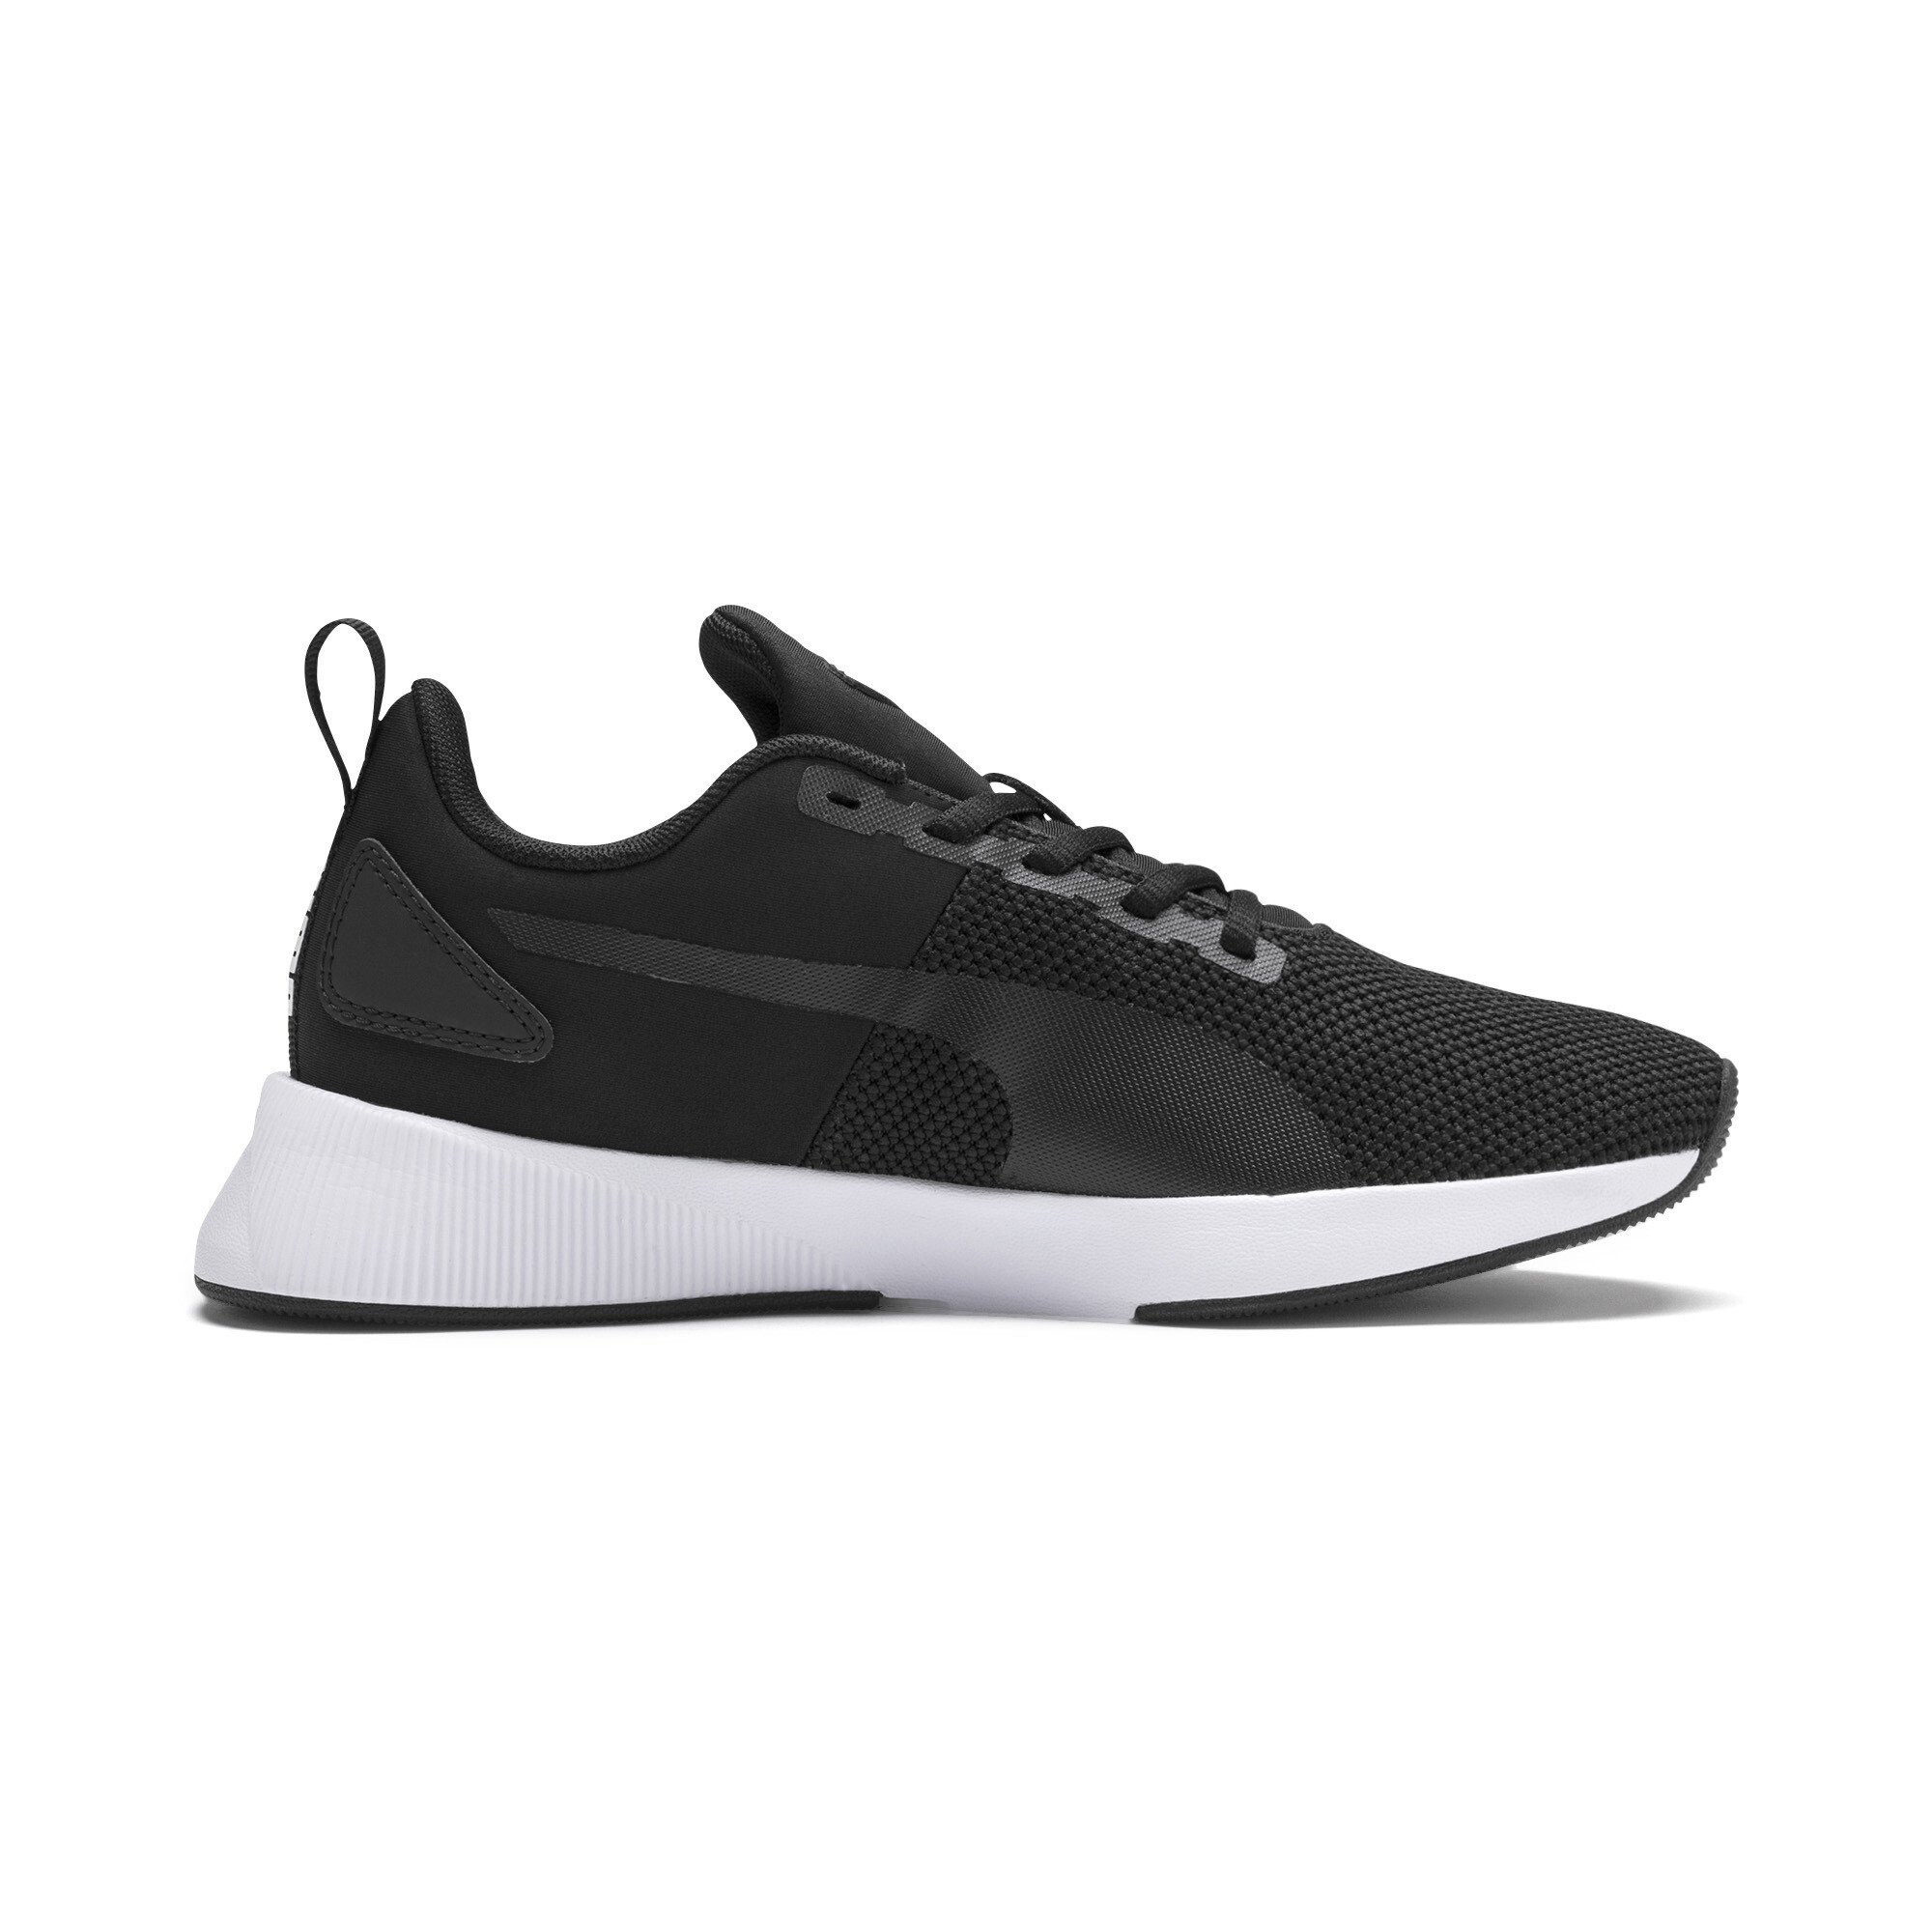 PUMA Flyer Runner Youth Trainers In 10 - Black, Size EU 37.5